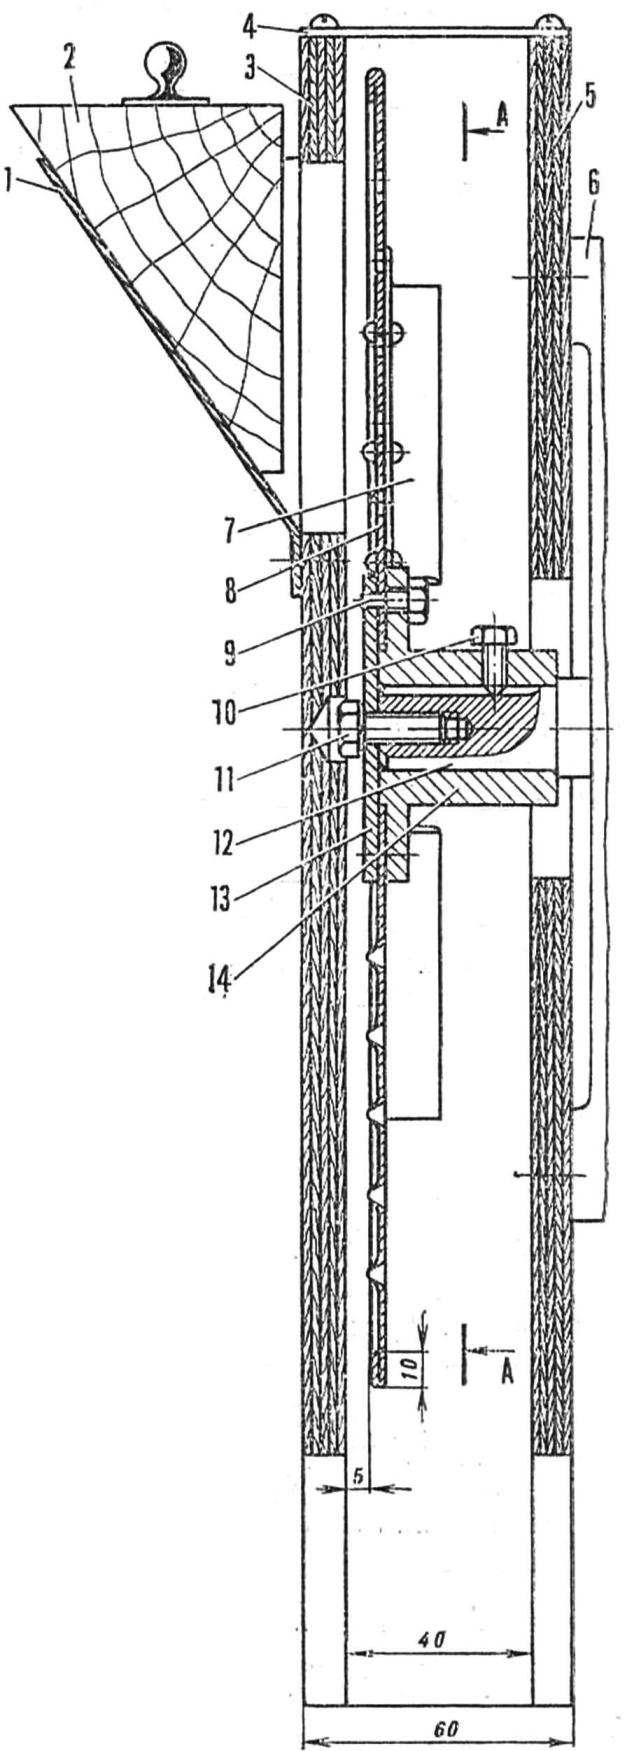 R and p. 2. Mount the disk on the motor shaft